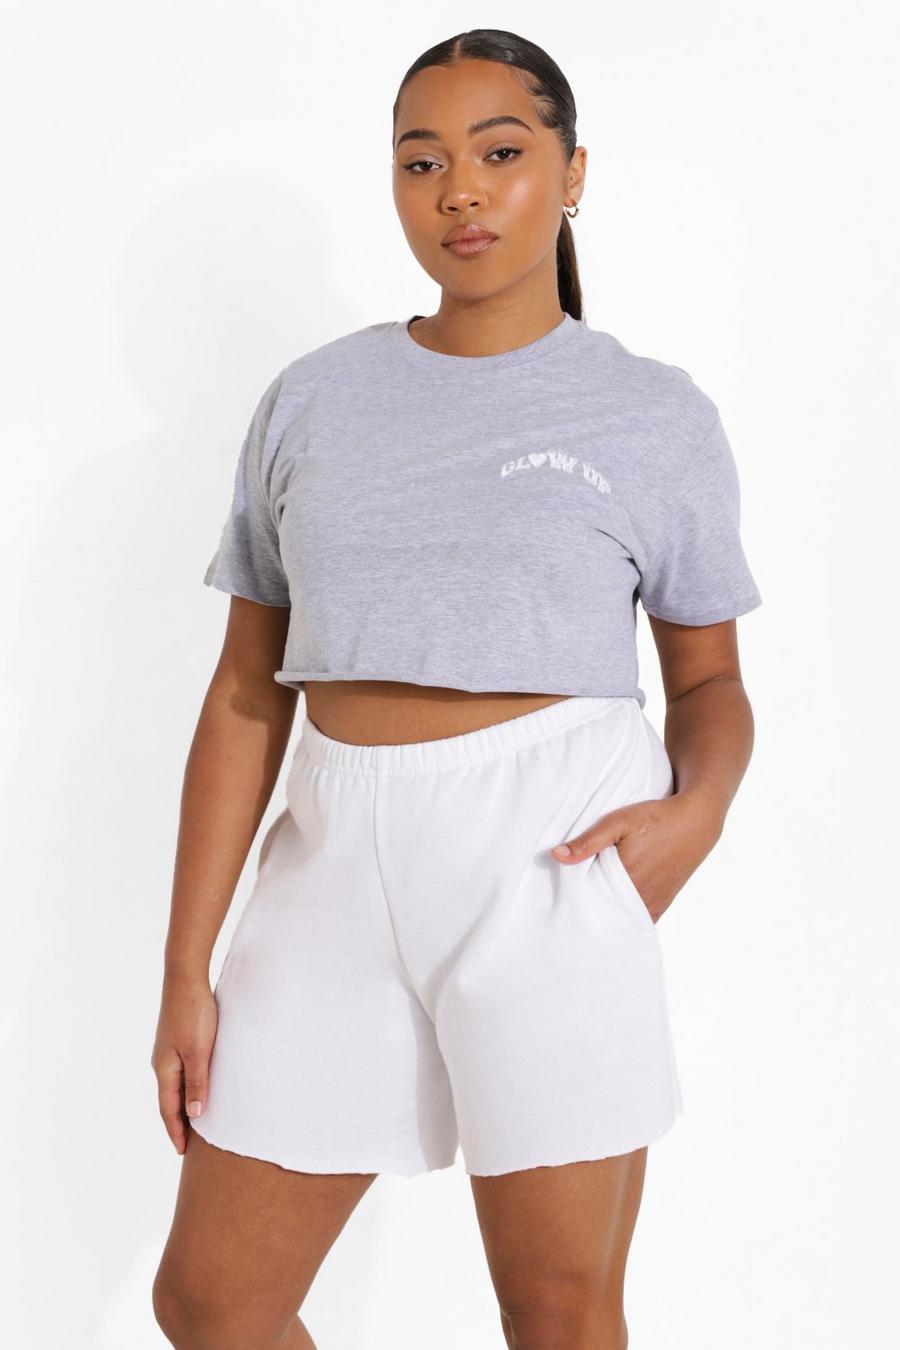 Grande taille - T-shirt court Glow Up, Grey marl image number 1